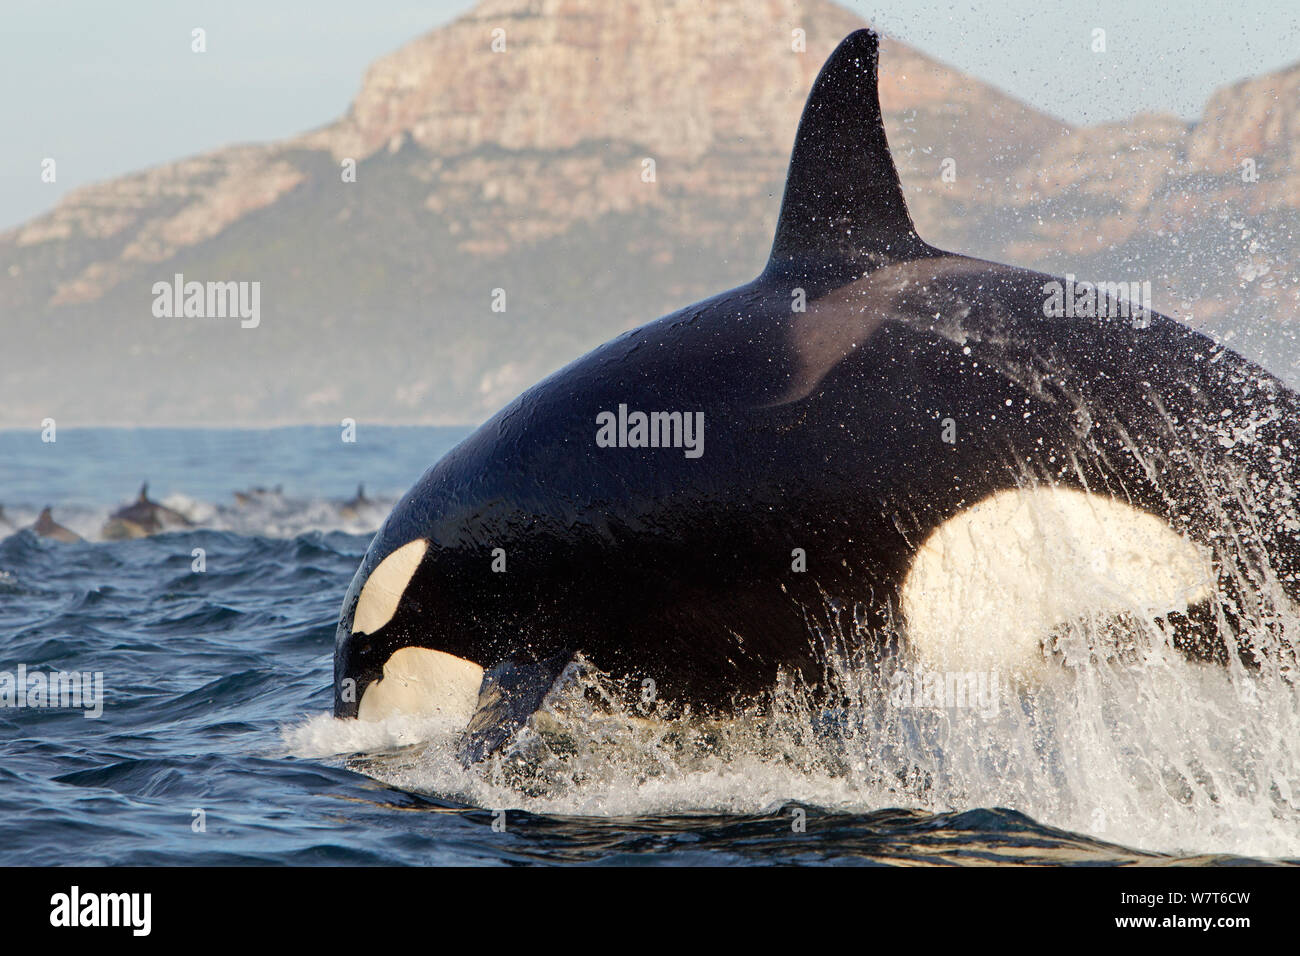 Killer whale (Orcinus orca) hunting common dolphin (Delphinus delphis), False Bay, South Africa, July. Stock Photo